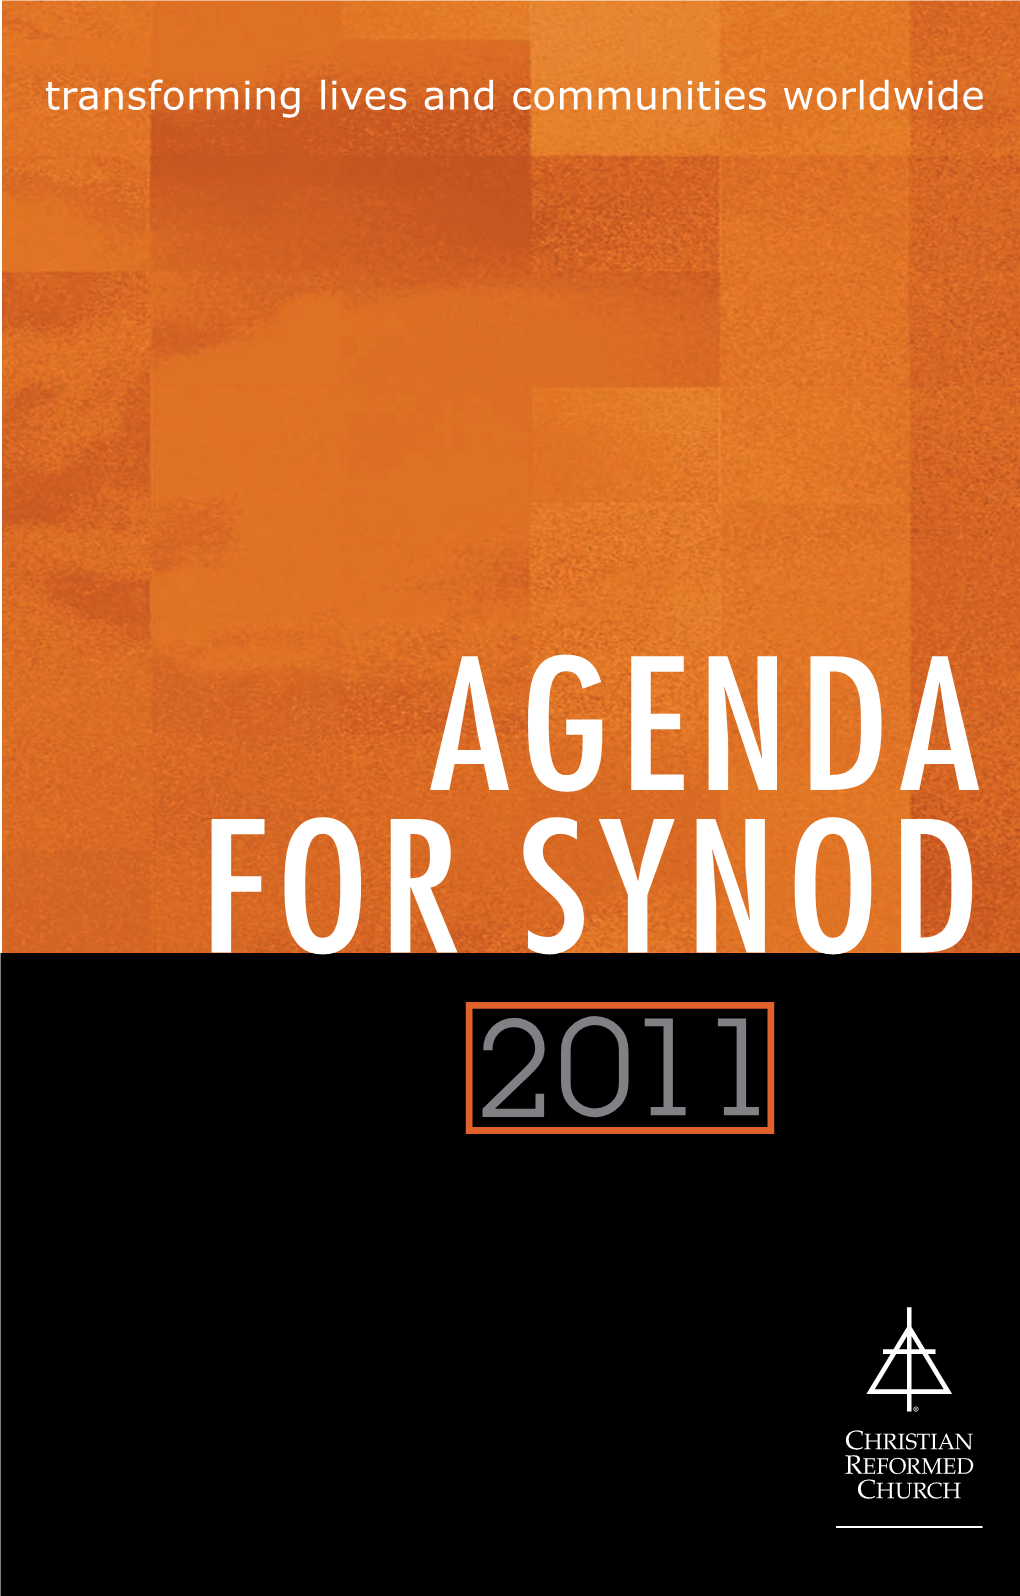 Agenda for Synod 2 011 2011 Transforming Lives and Communities Worldwide